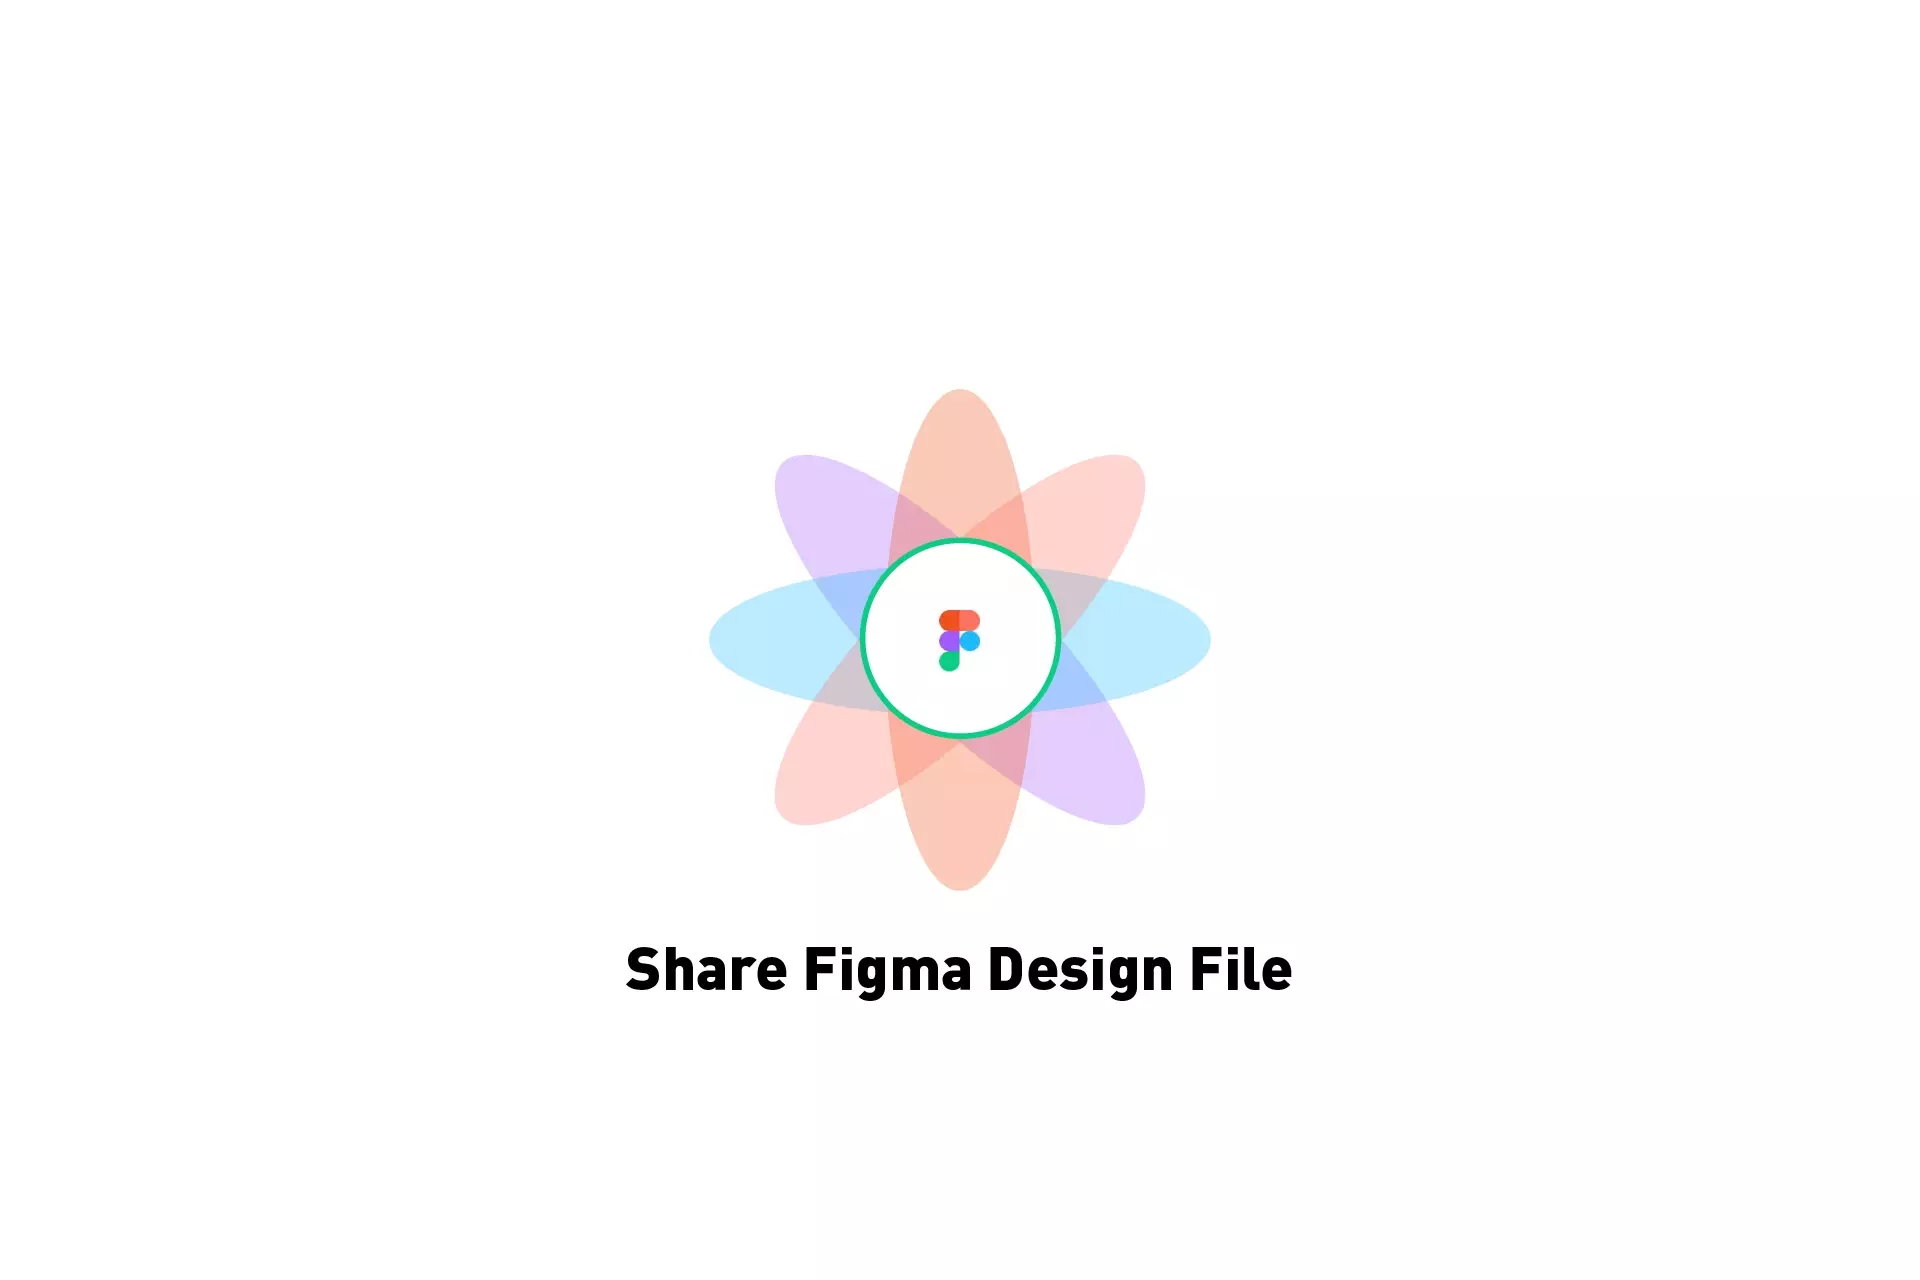 A flower that represents Figma with the text "Share Figma Design File" beneath it.